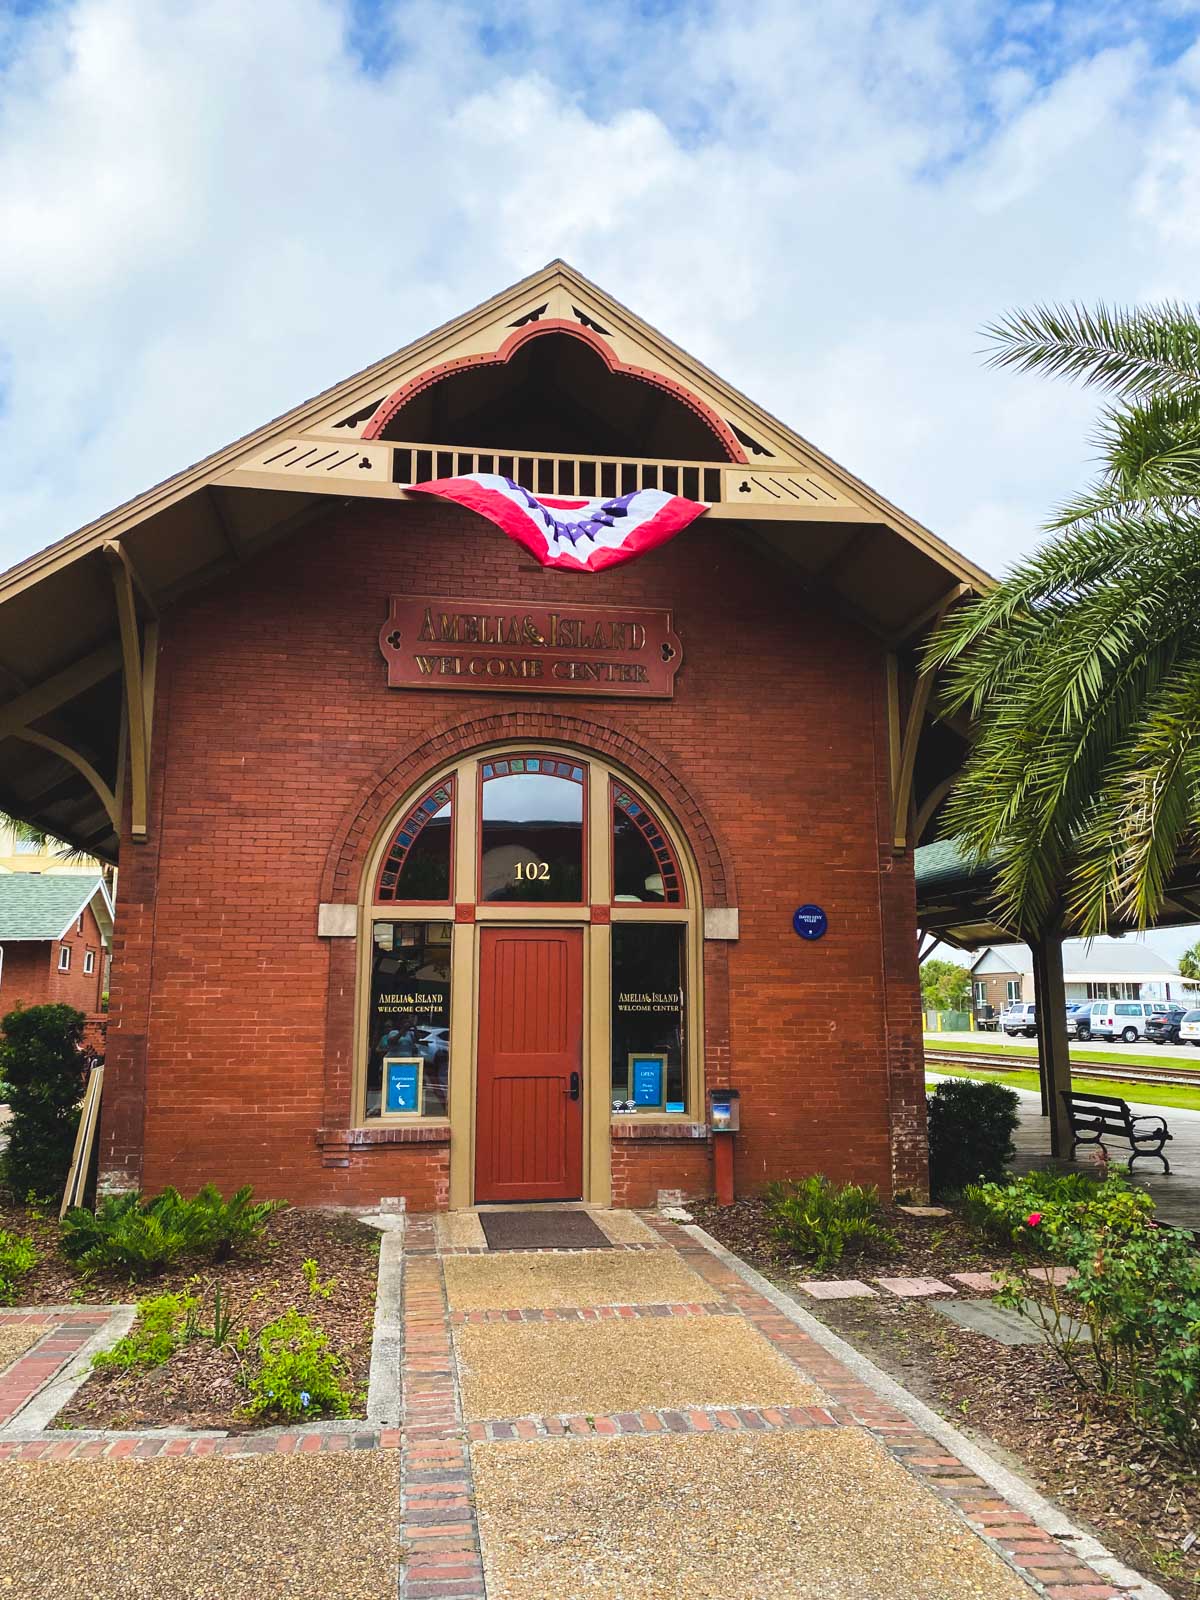 The outside of the visitor center in downtown Amelia Island.